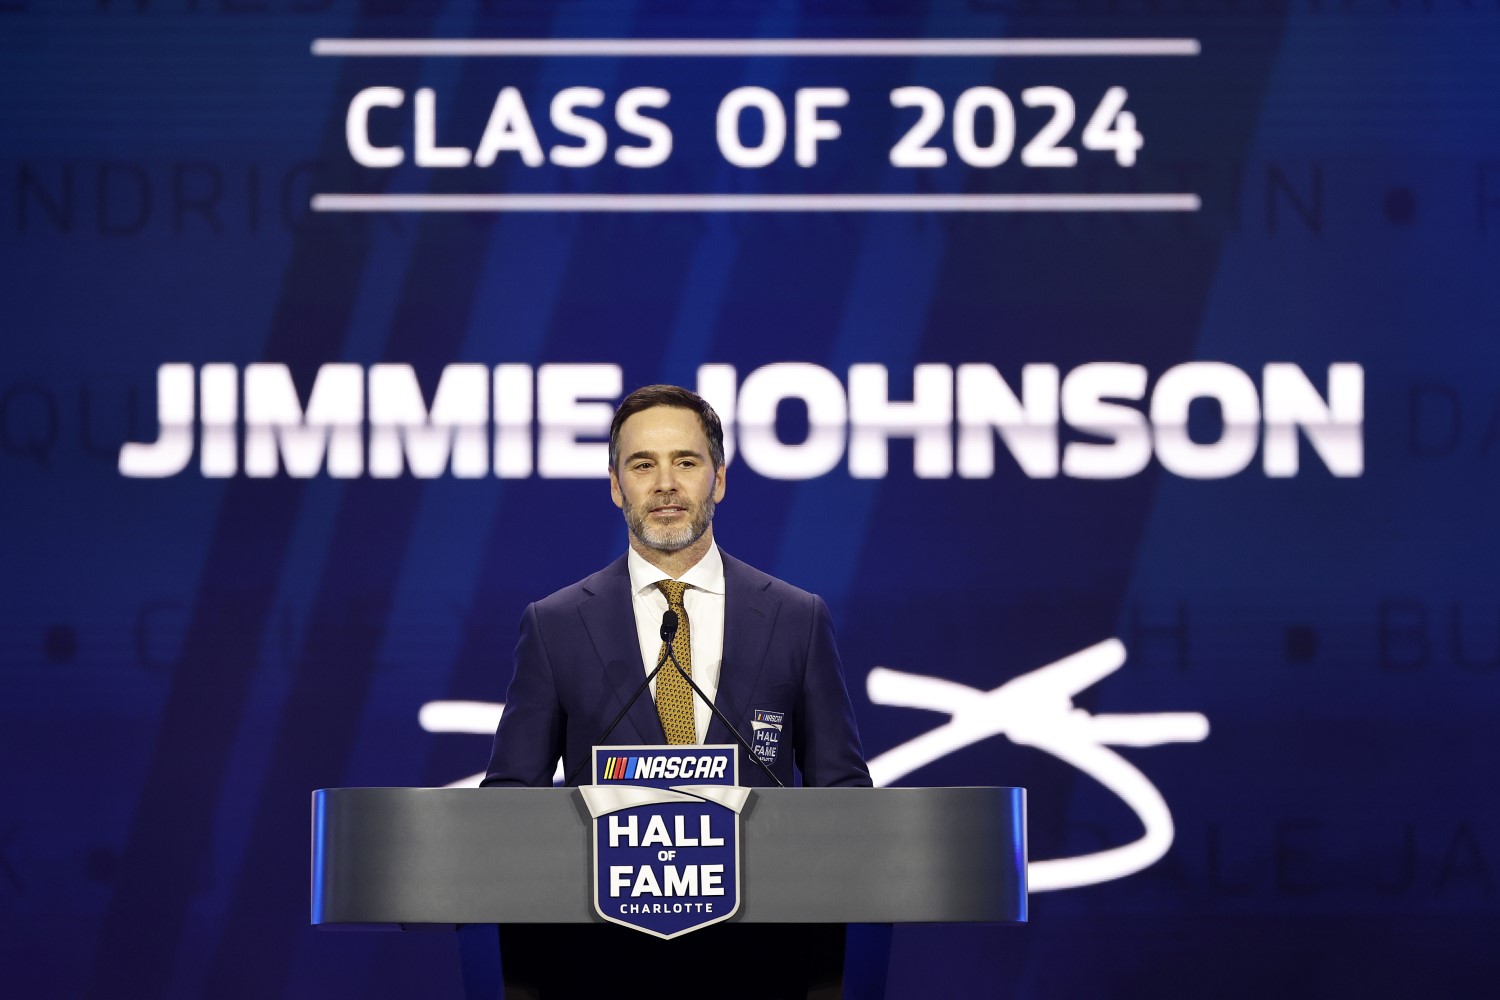 NASCAR Hall of Fame inductee Jimmie Johnson speaks during the 2024 NASCAR Hall of Fame Induction Ceremony at Charlotte Convention Center on January 19, 2024 in Charlotte, North Carolina. (Photo by Chris Graythen/Getty Images)